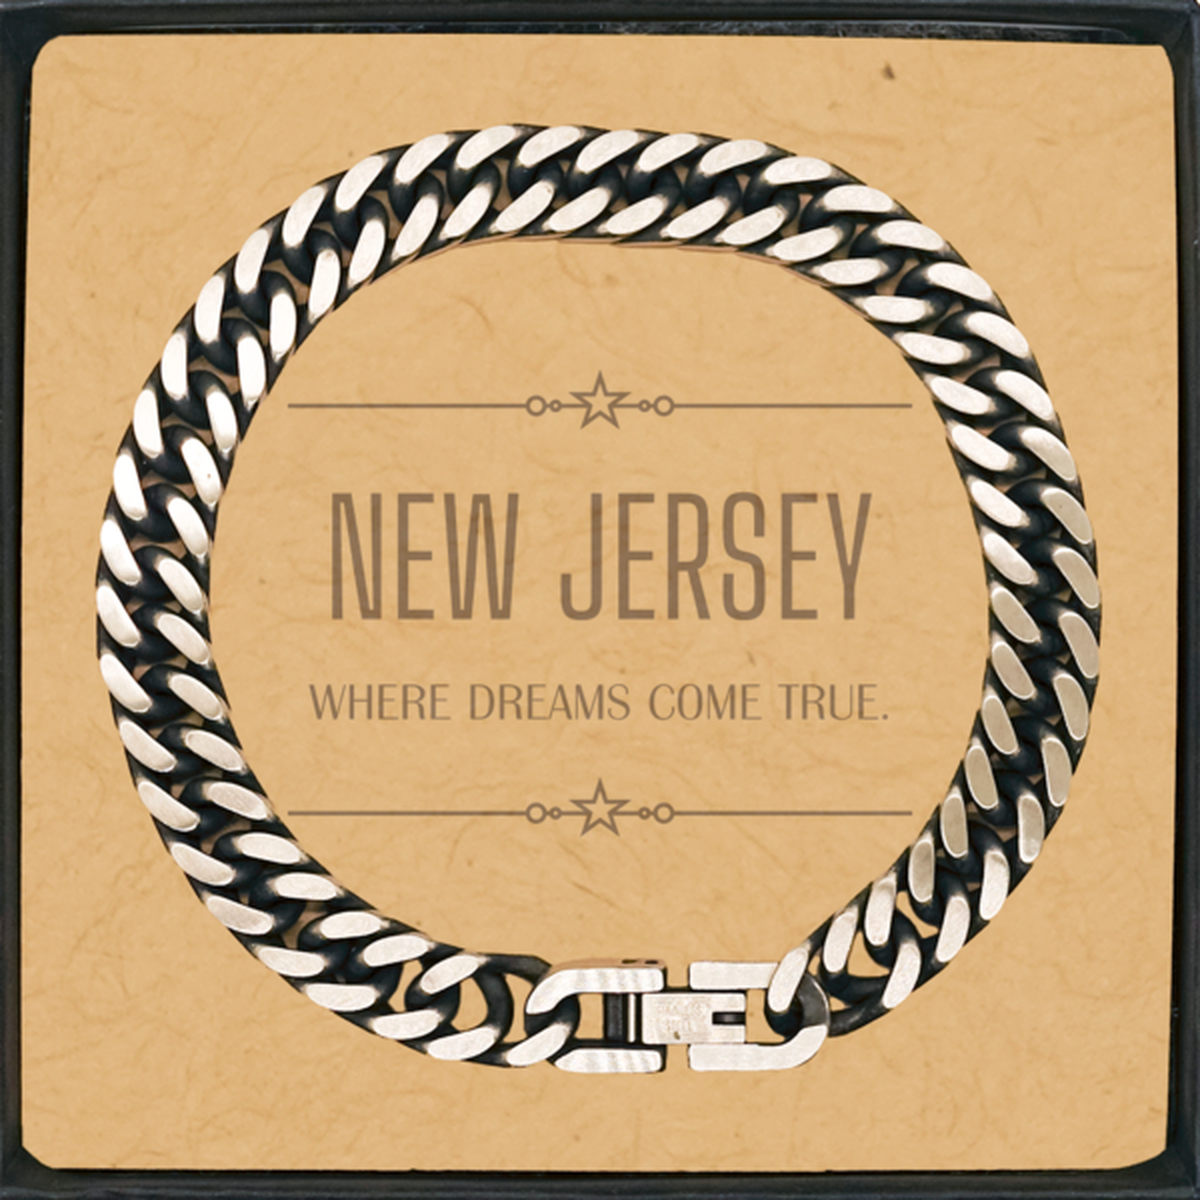 Love New Jersey State Cuban Link Chain Bracelet, New Jersey Where dreams come true, Birthday Inspirational Gifts For New Jersey Men, Women, Friends